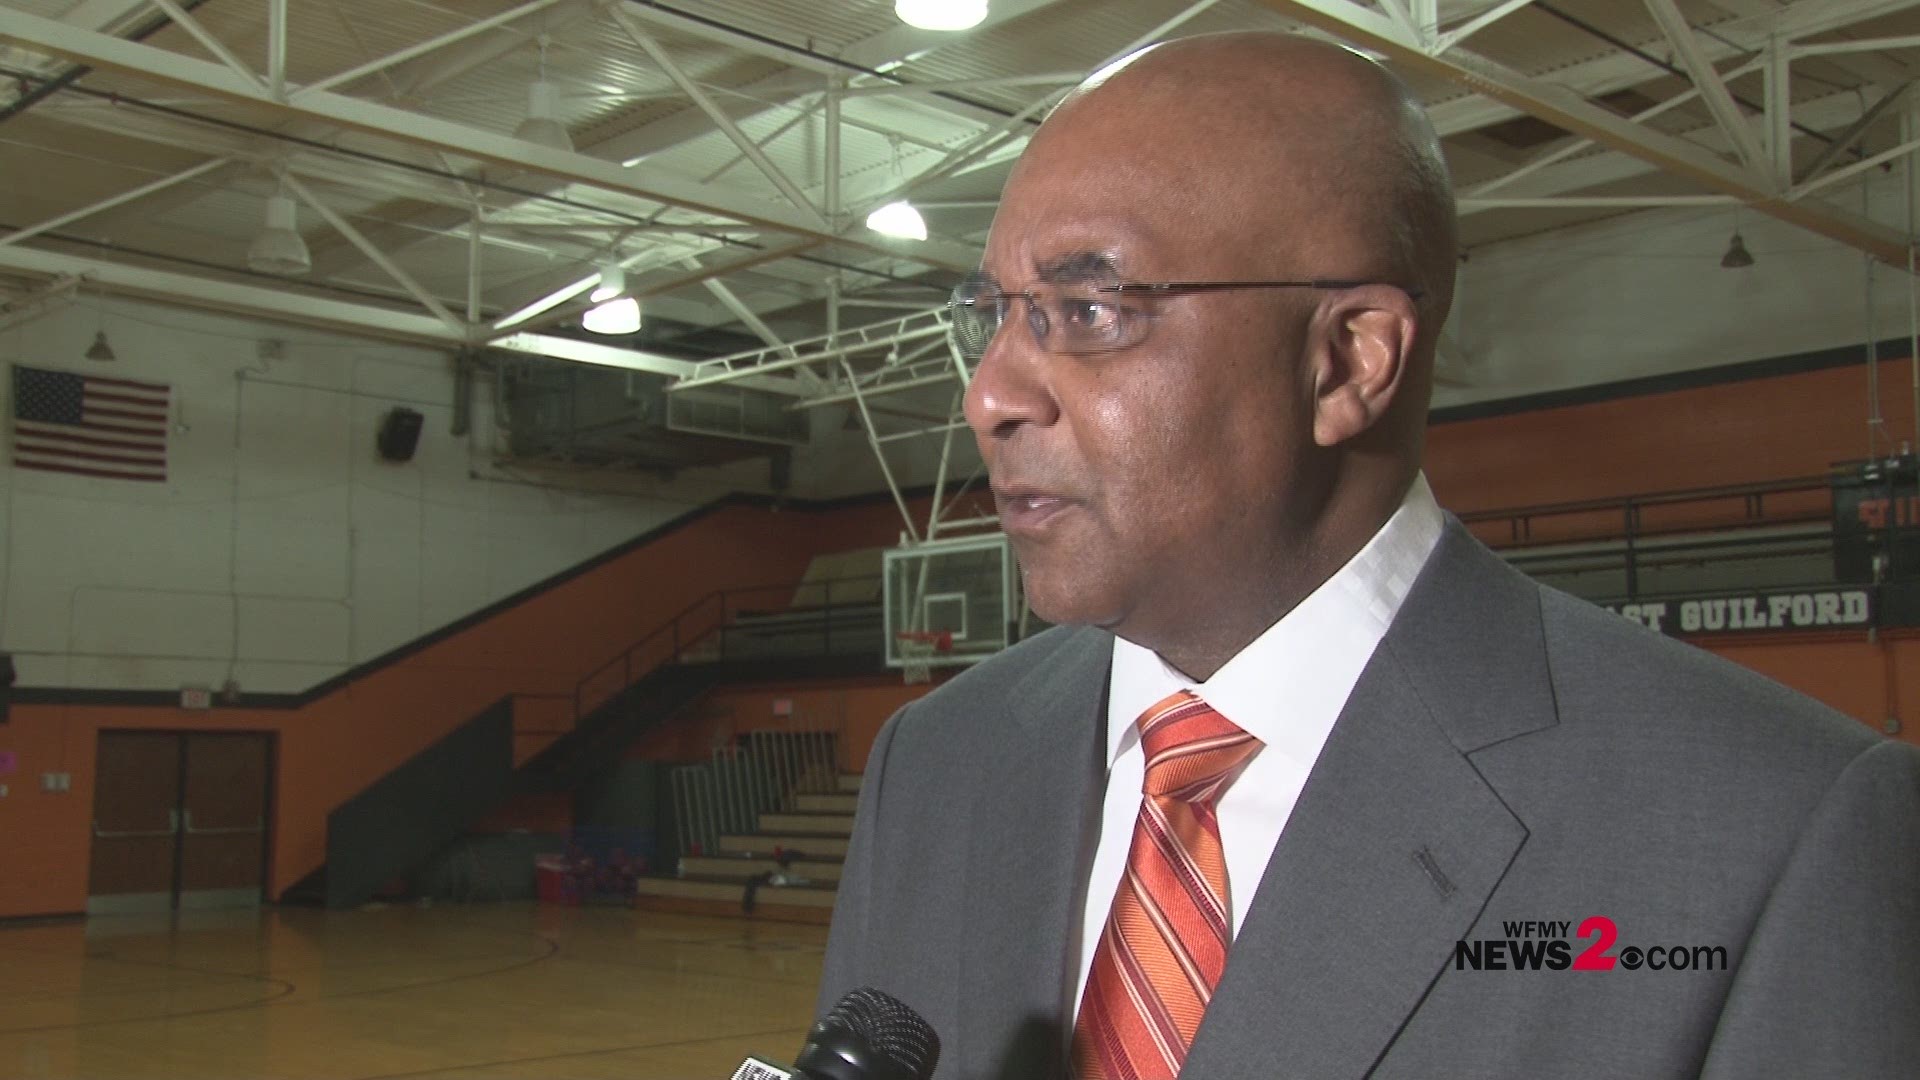 SE Guilford Retires Hornets President Fred Whitfield's Jersey